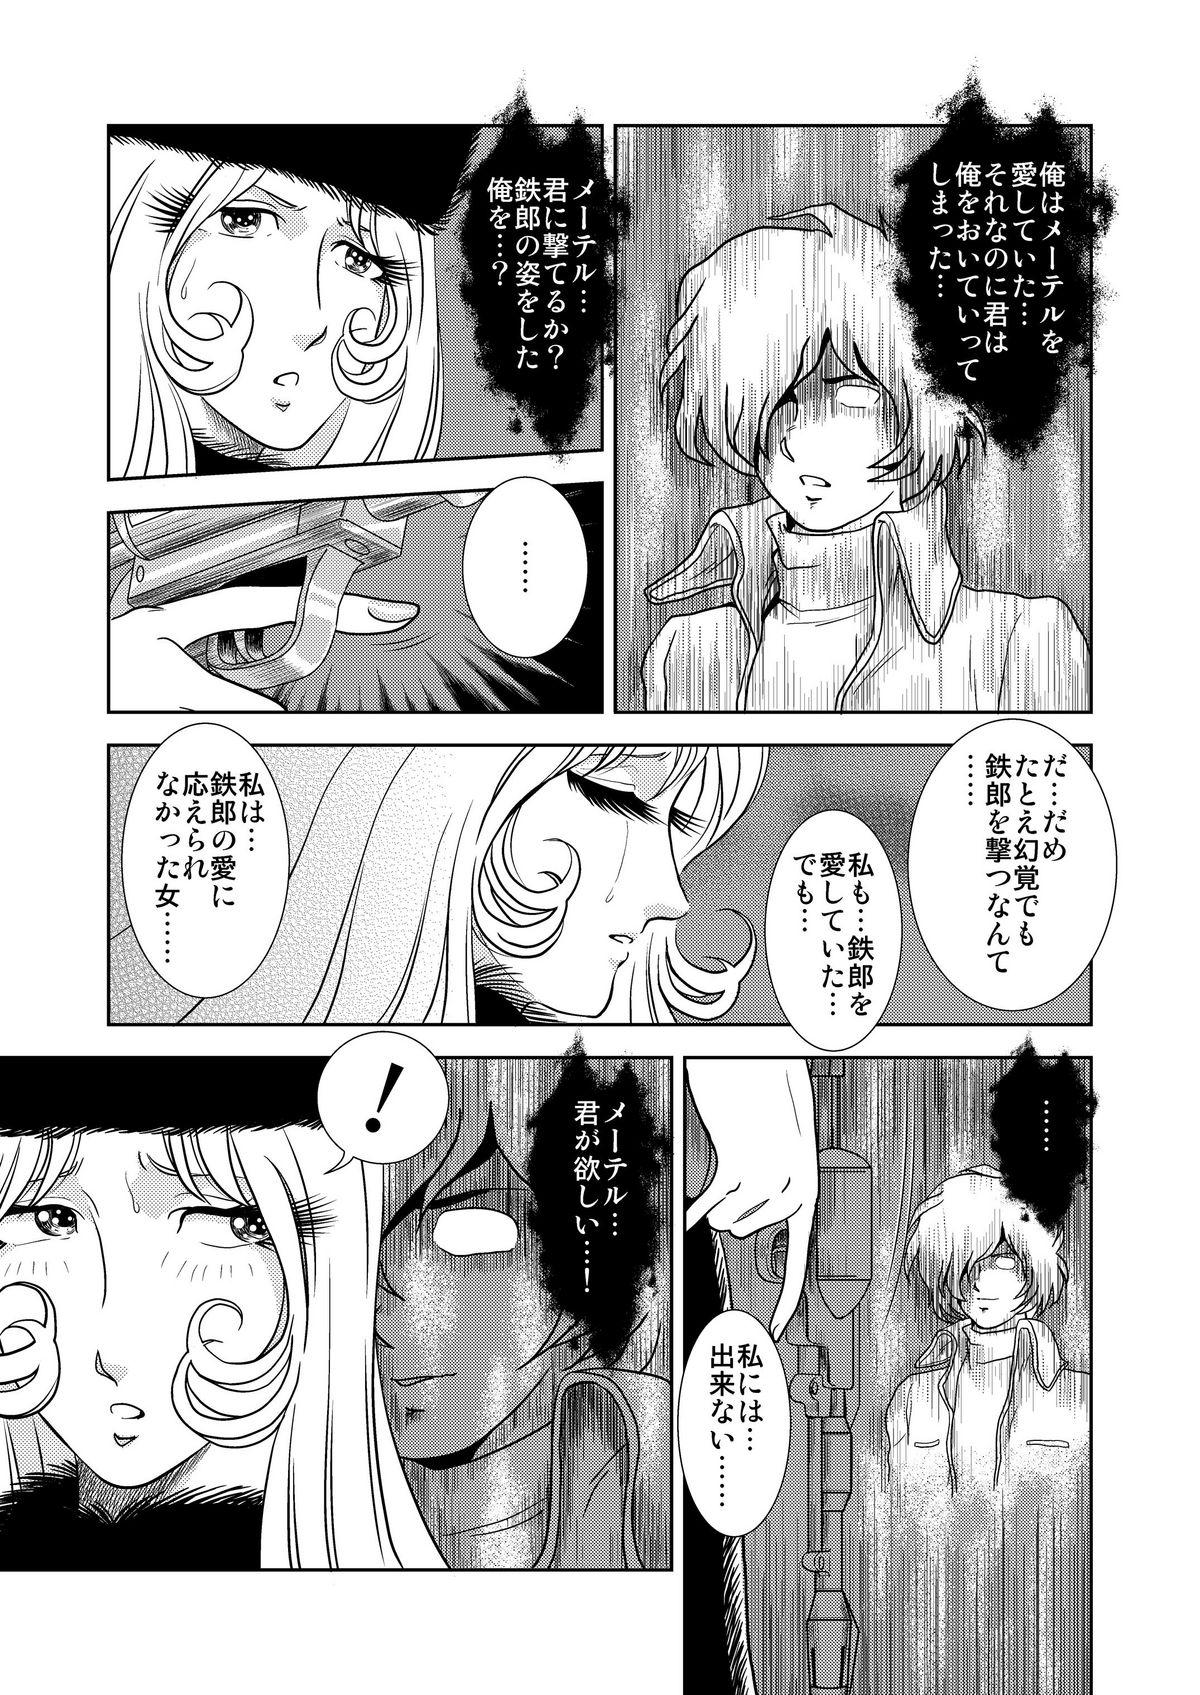 Family Sex Maetel Story - Galaxy express 999 Stepfamily - Page 7